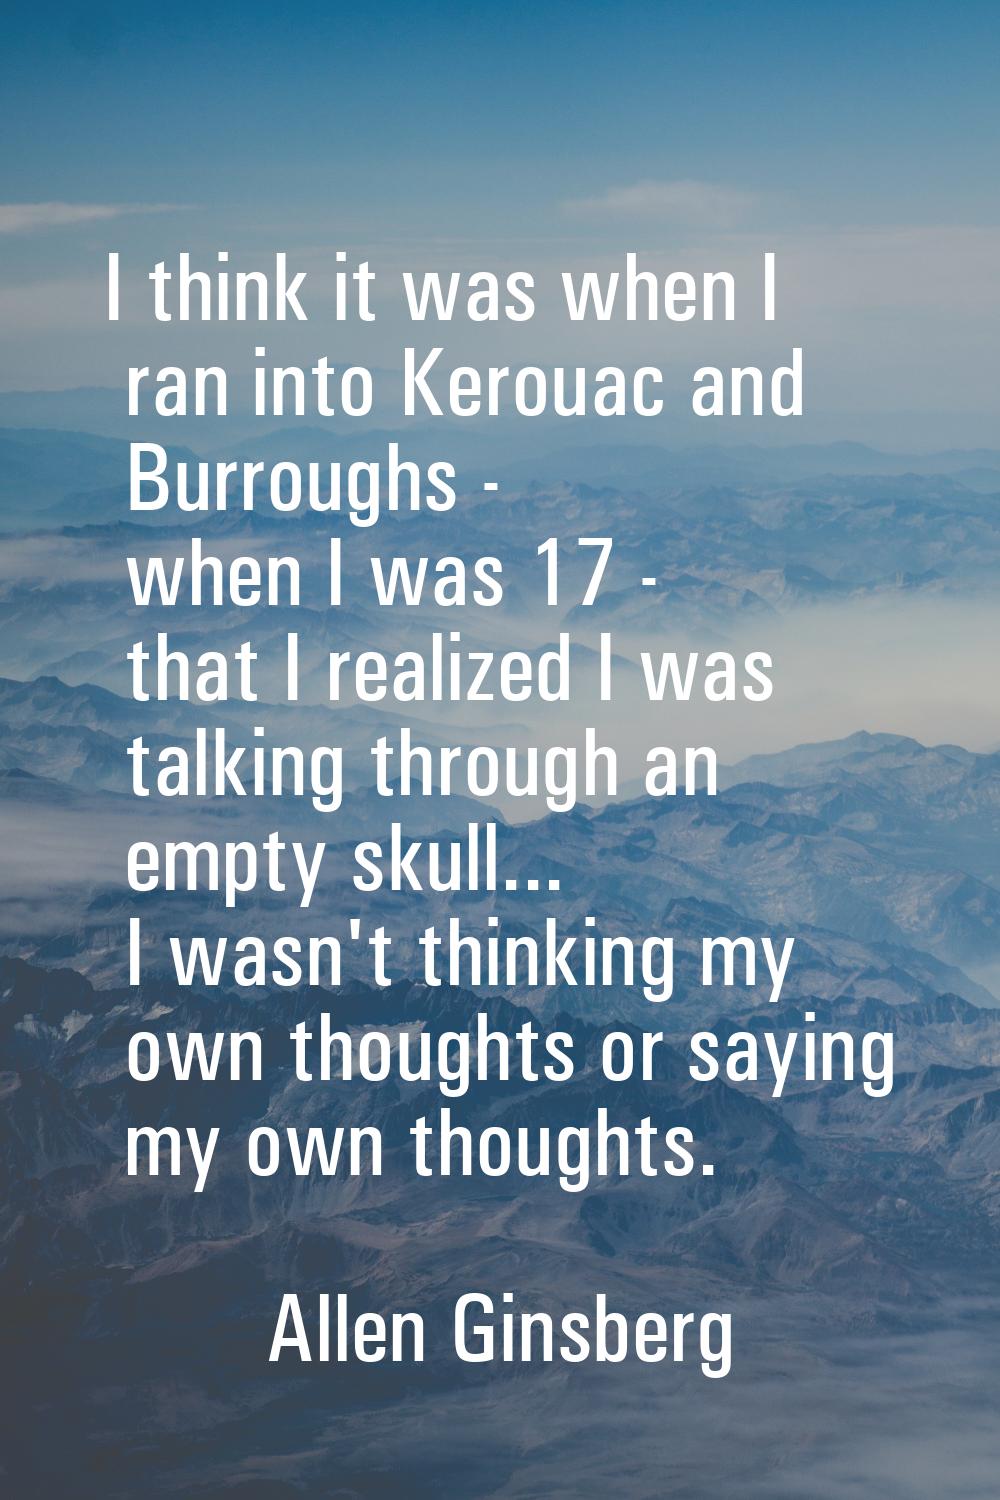 I think it was when I ran into Kerouac and Burroughs - when I was 17 - that I realized I was talkin